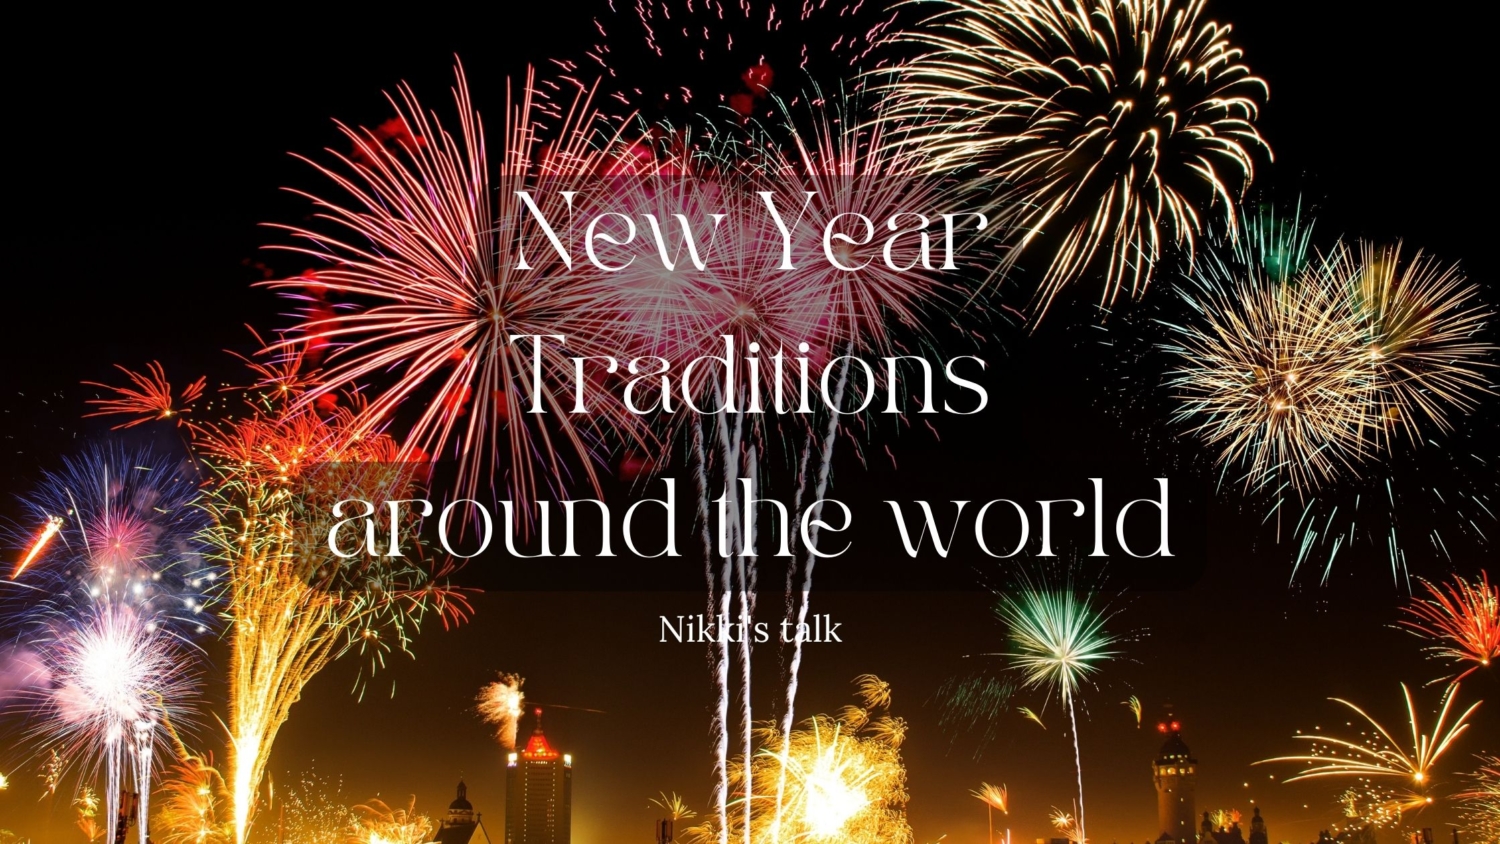 New Year Traditions